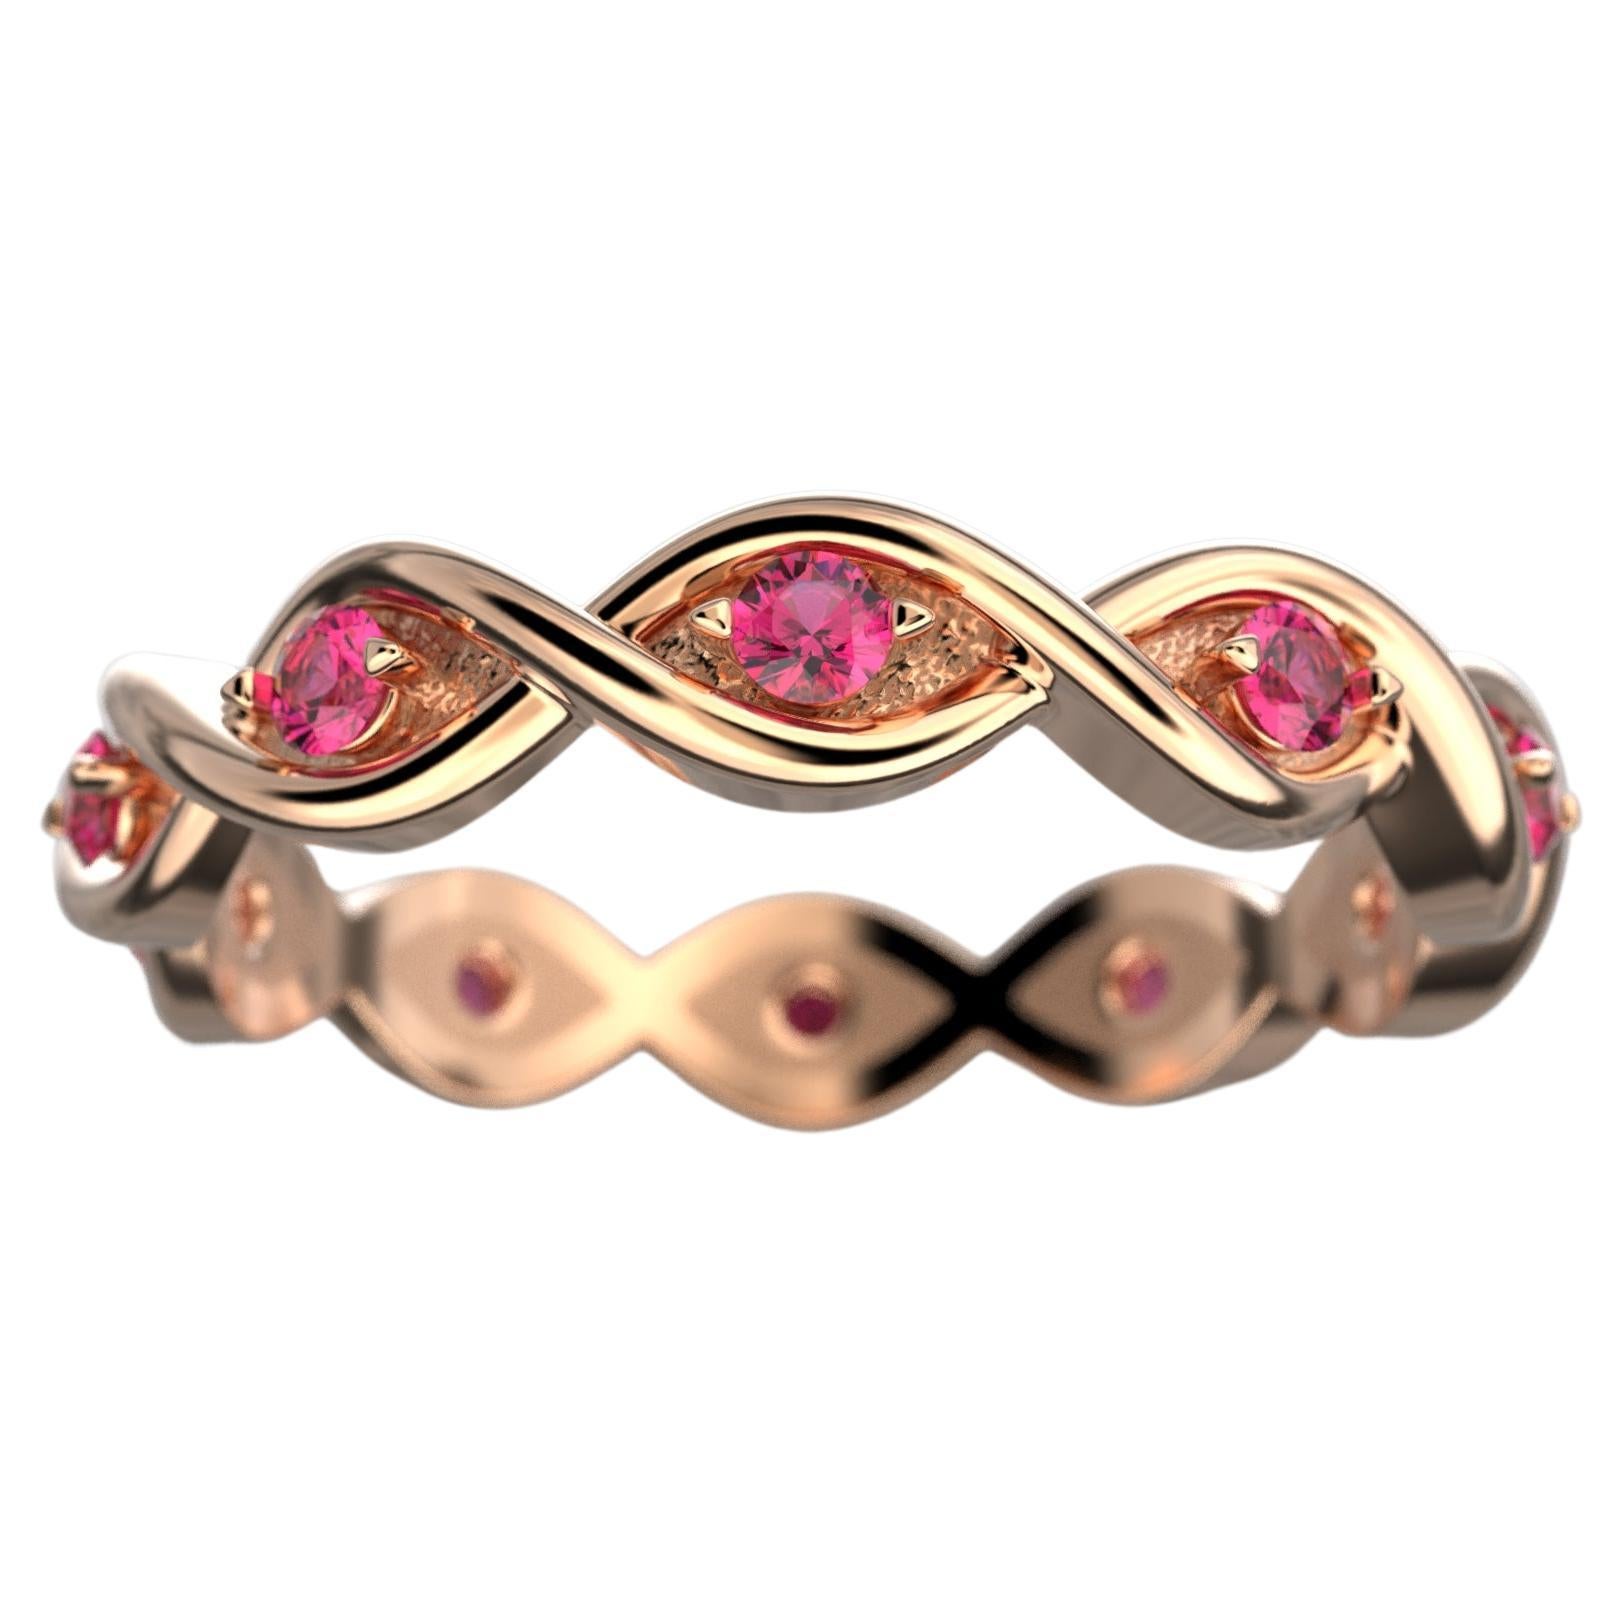 Eternity Ruby Band Handcrafted in Italy in 18k Solid Gold by Oltremare Gioielli